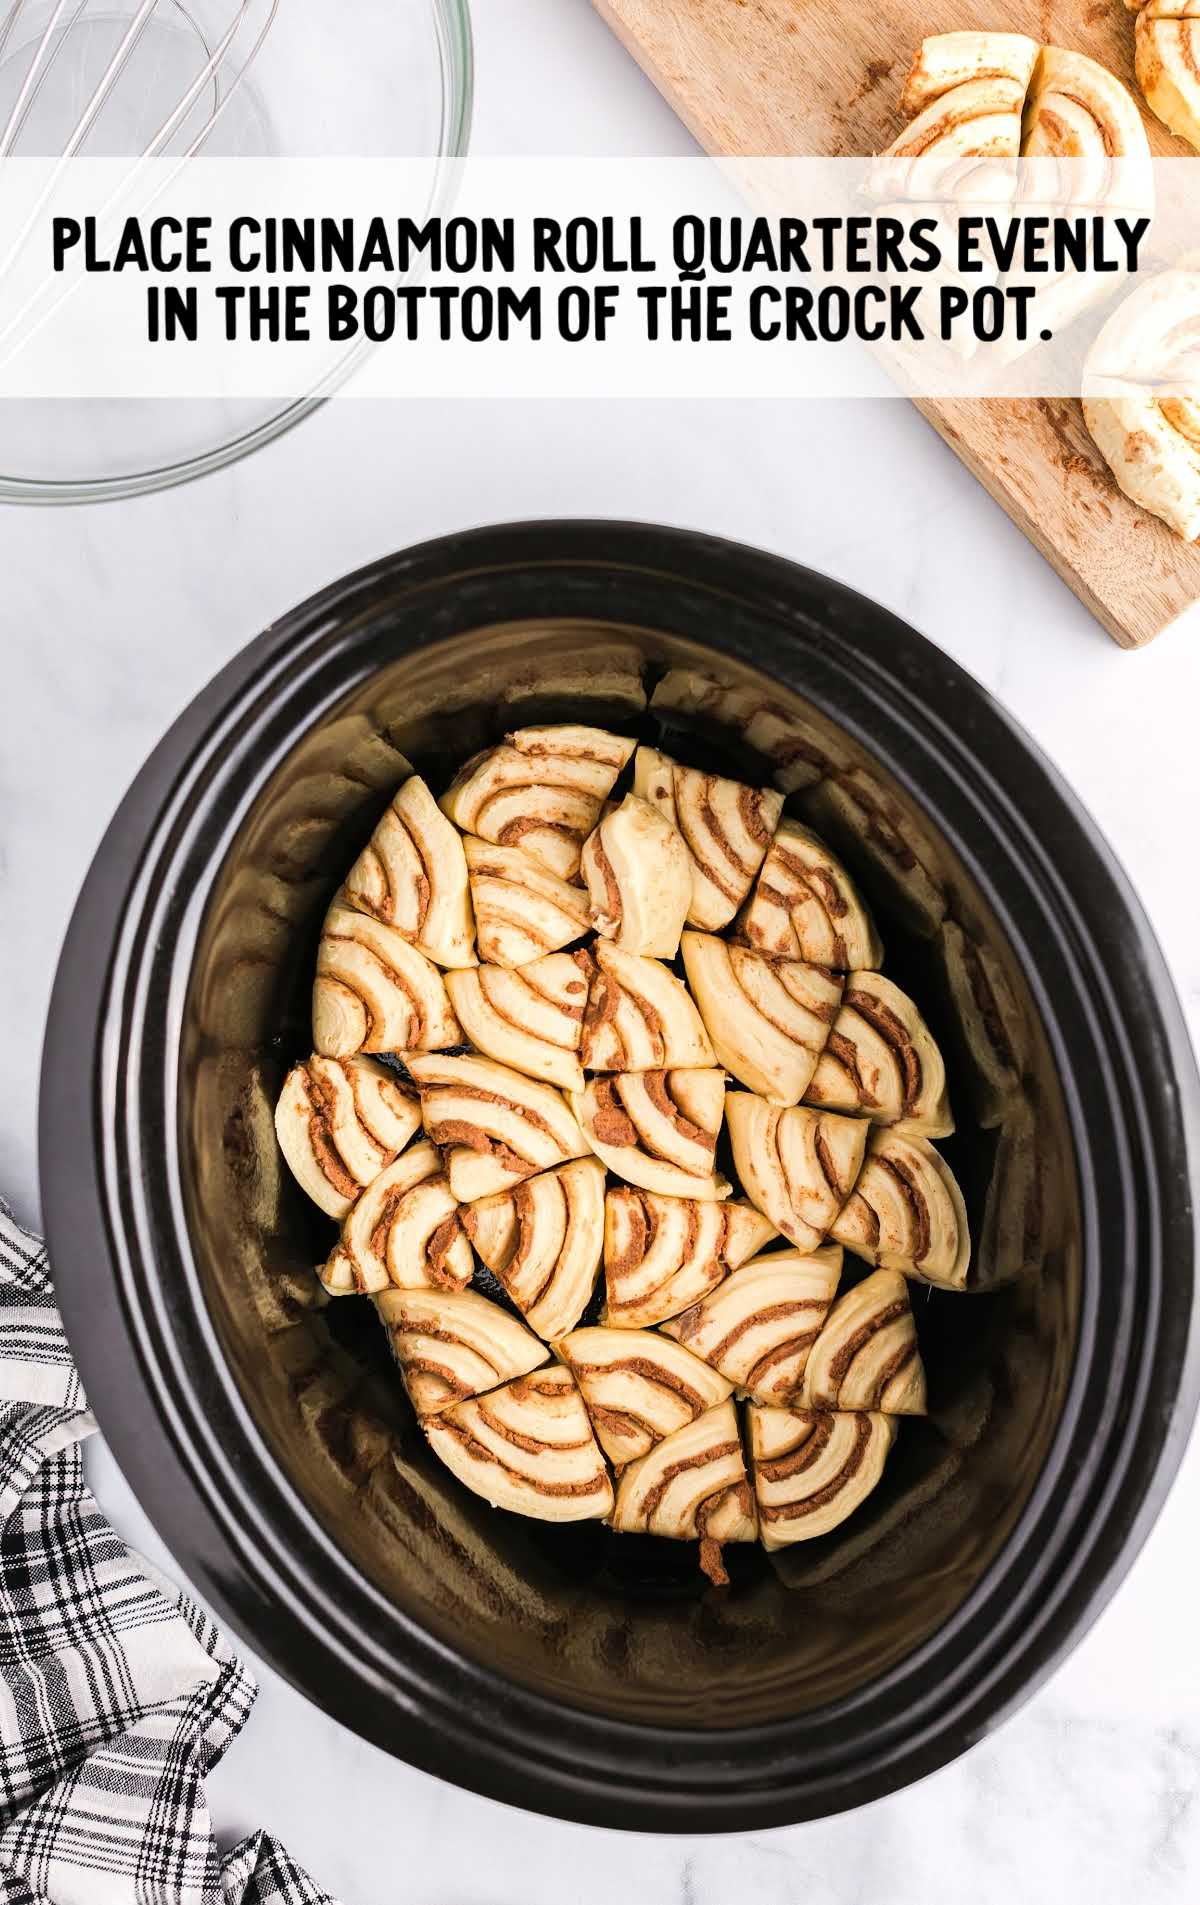 cinnamon roll quarters placed in the bottom of a crockpot